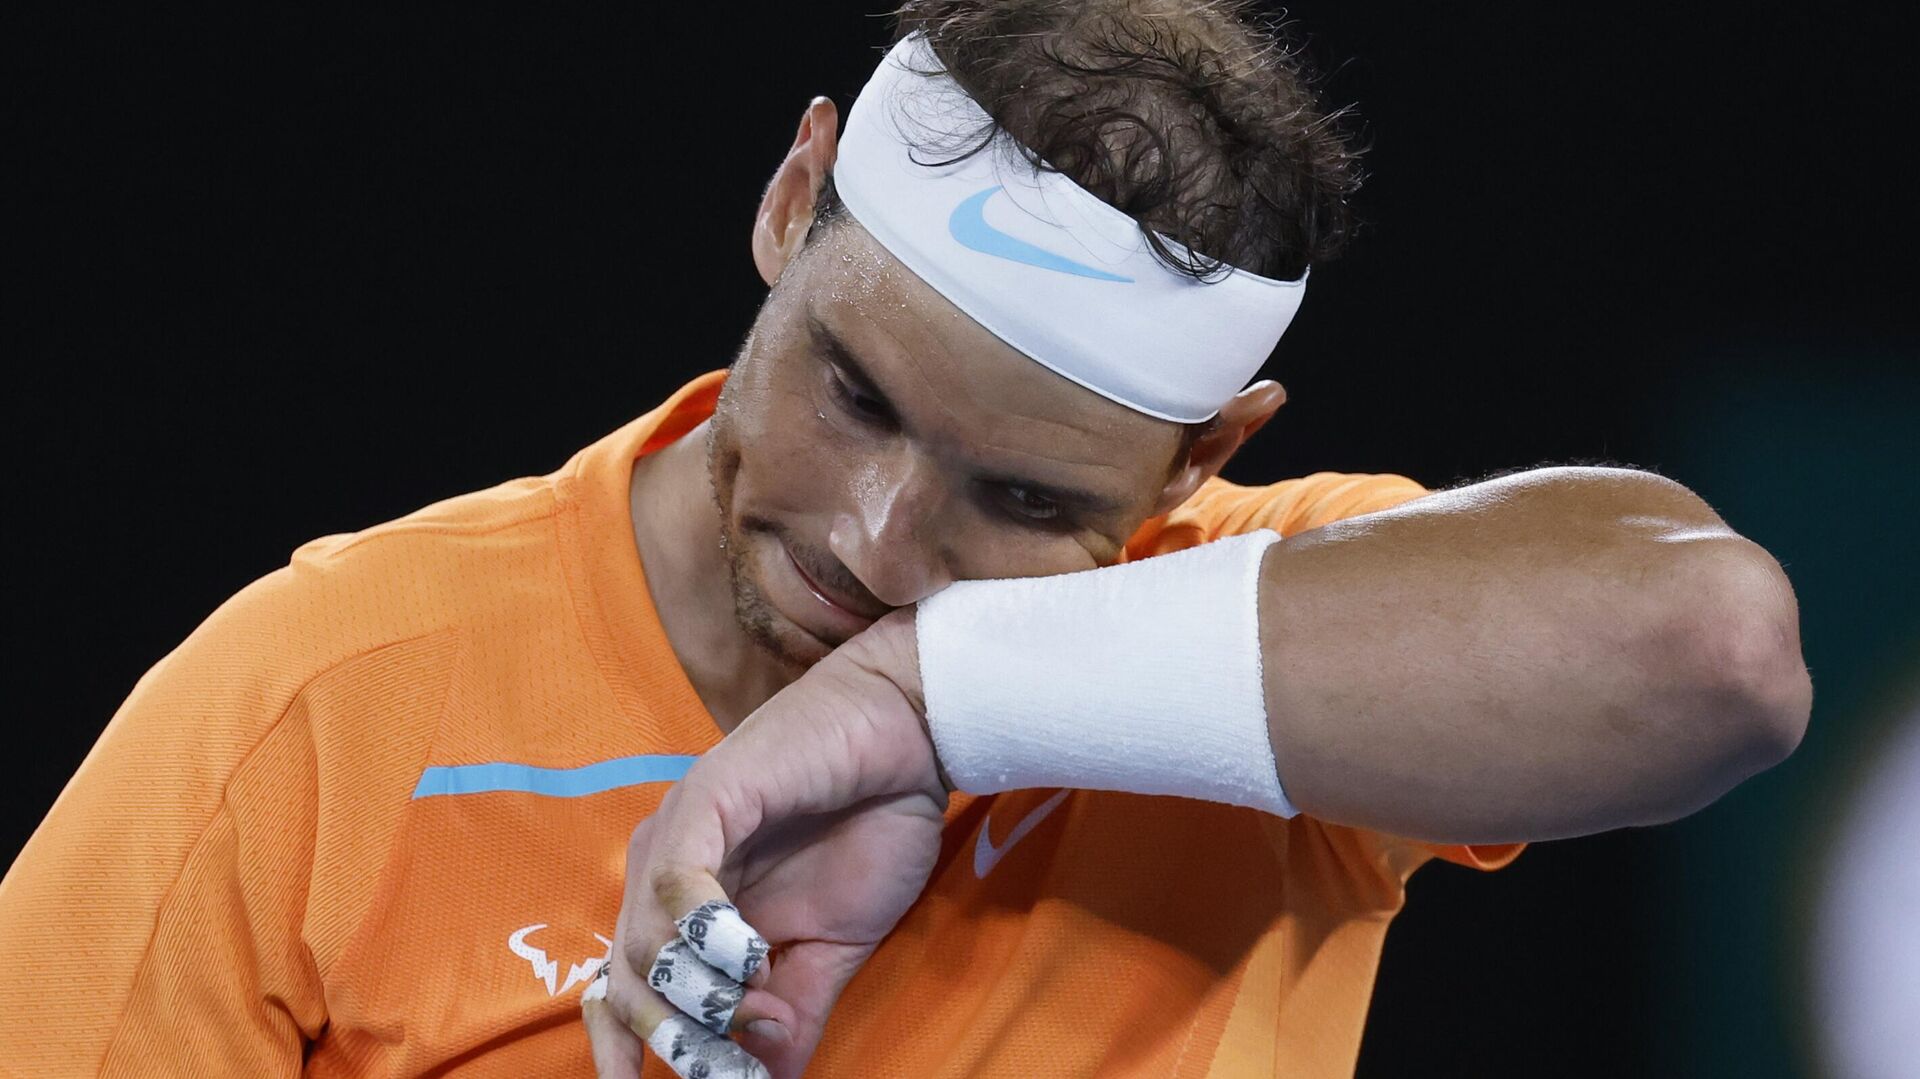 Rafael Nadal of Spain wipes the sweat from his face during his second round match against Mackenzie McDonald of the U.S., at the Australian Open tennis championship in Melbourne, Australia, Wednesday, Jan. 18, 2023. - Sputnik India, 1920, 18.01.2023